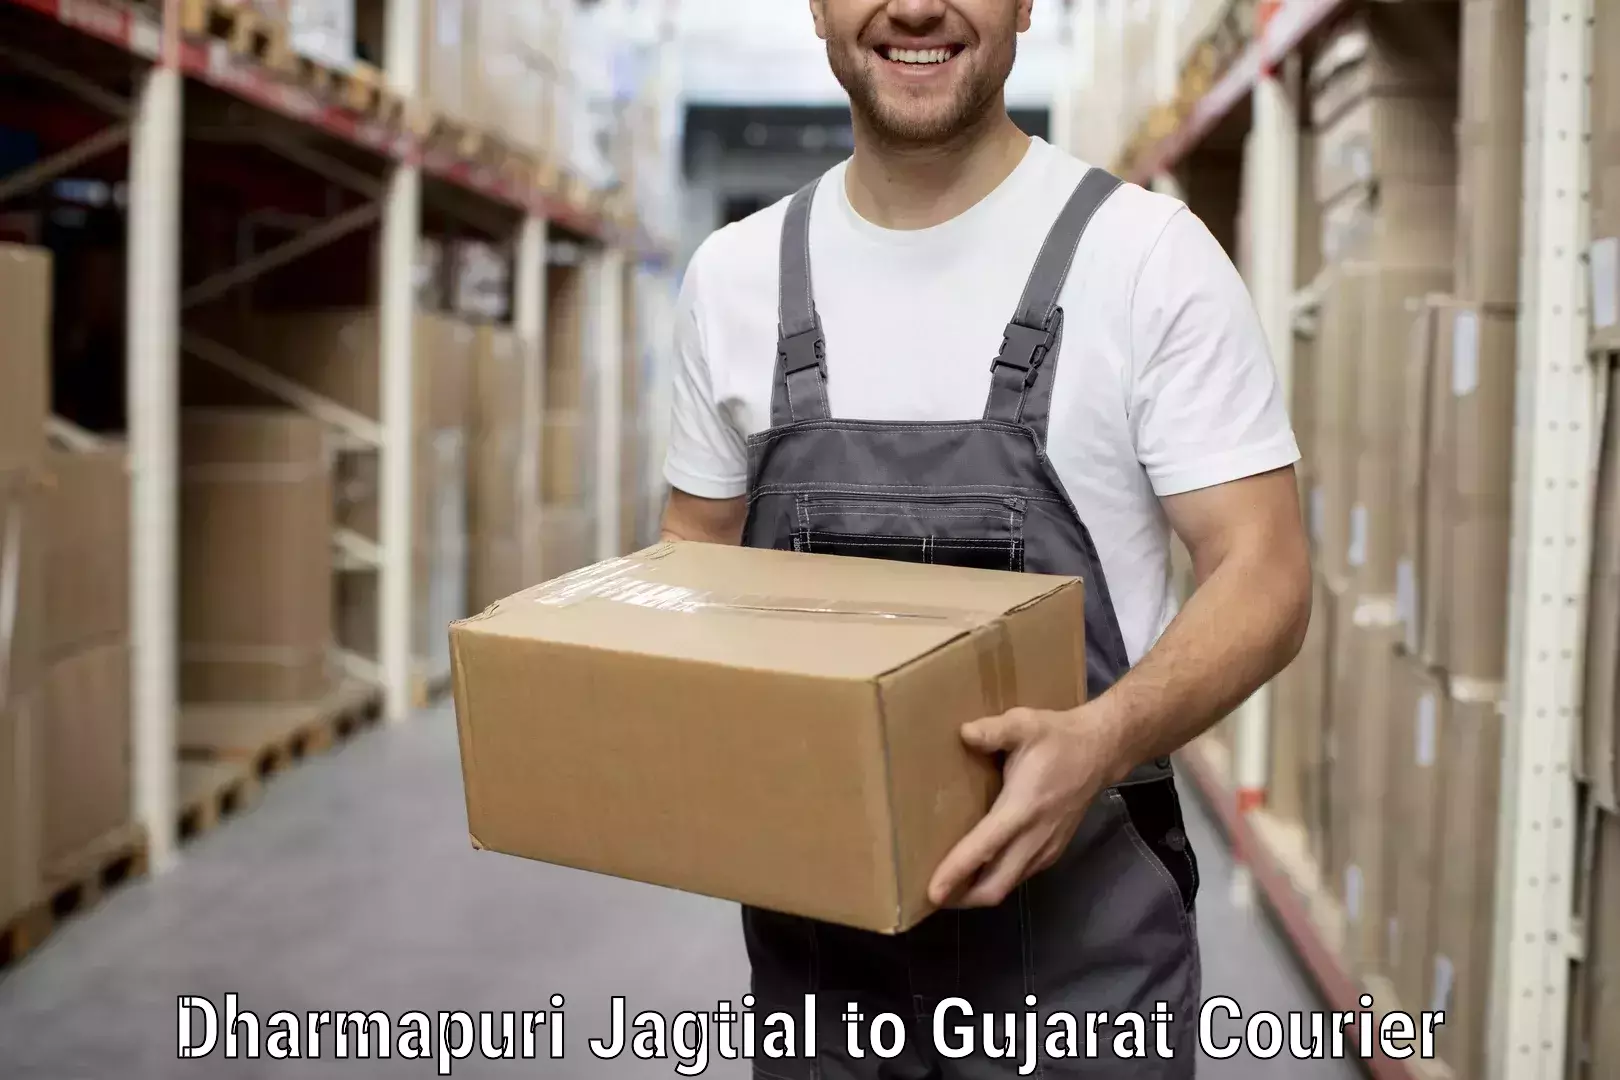 Quality relocation assistance Dharmapuri Jagtial to Bharuch